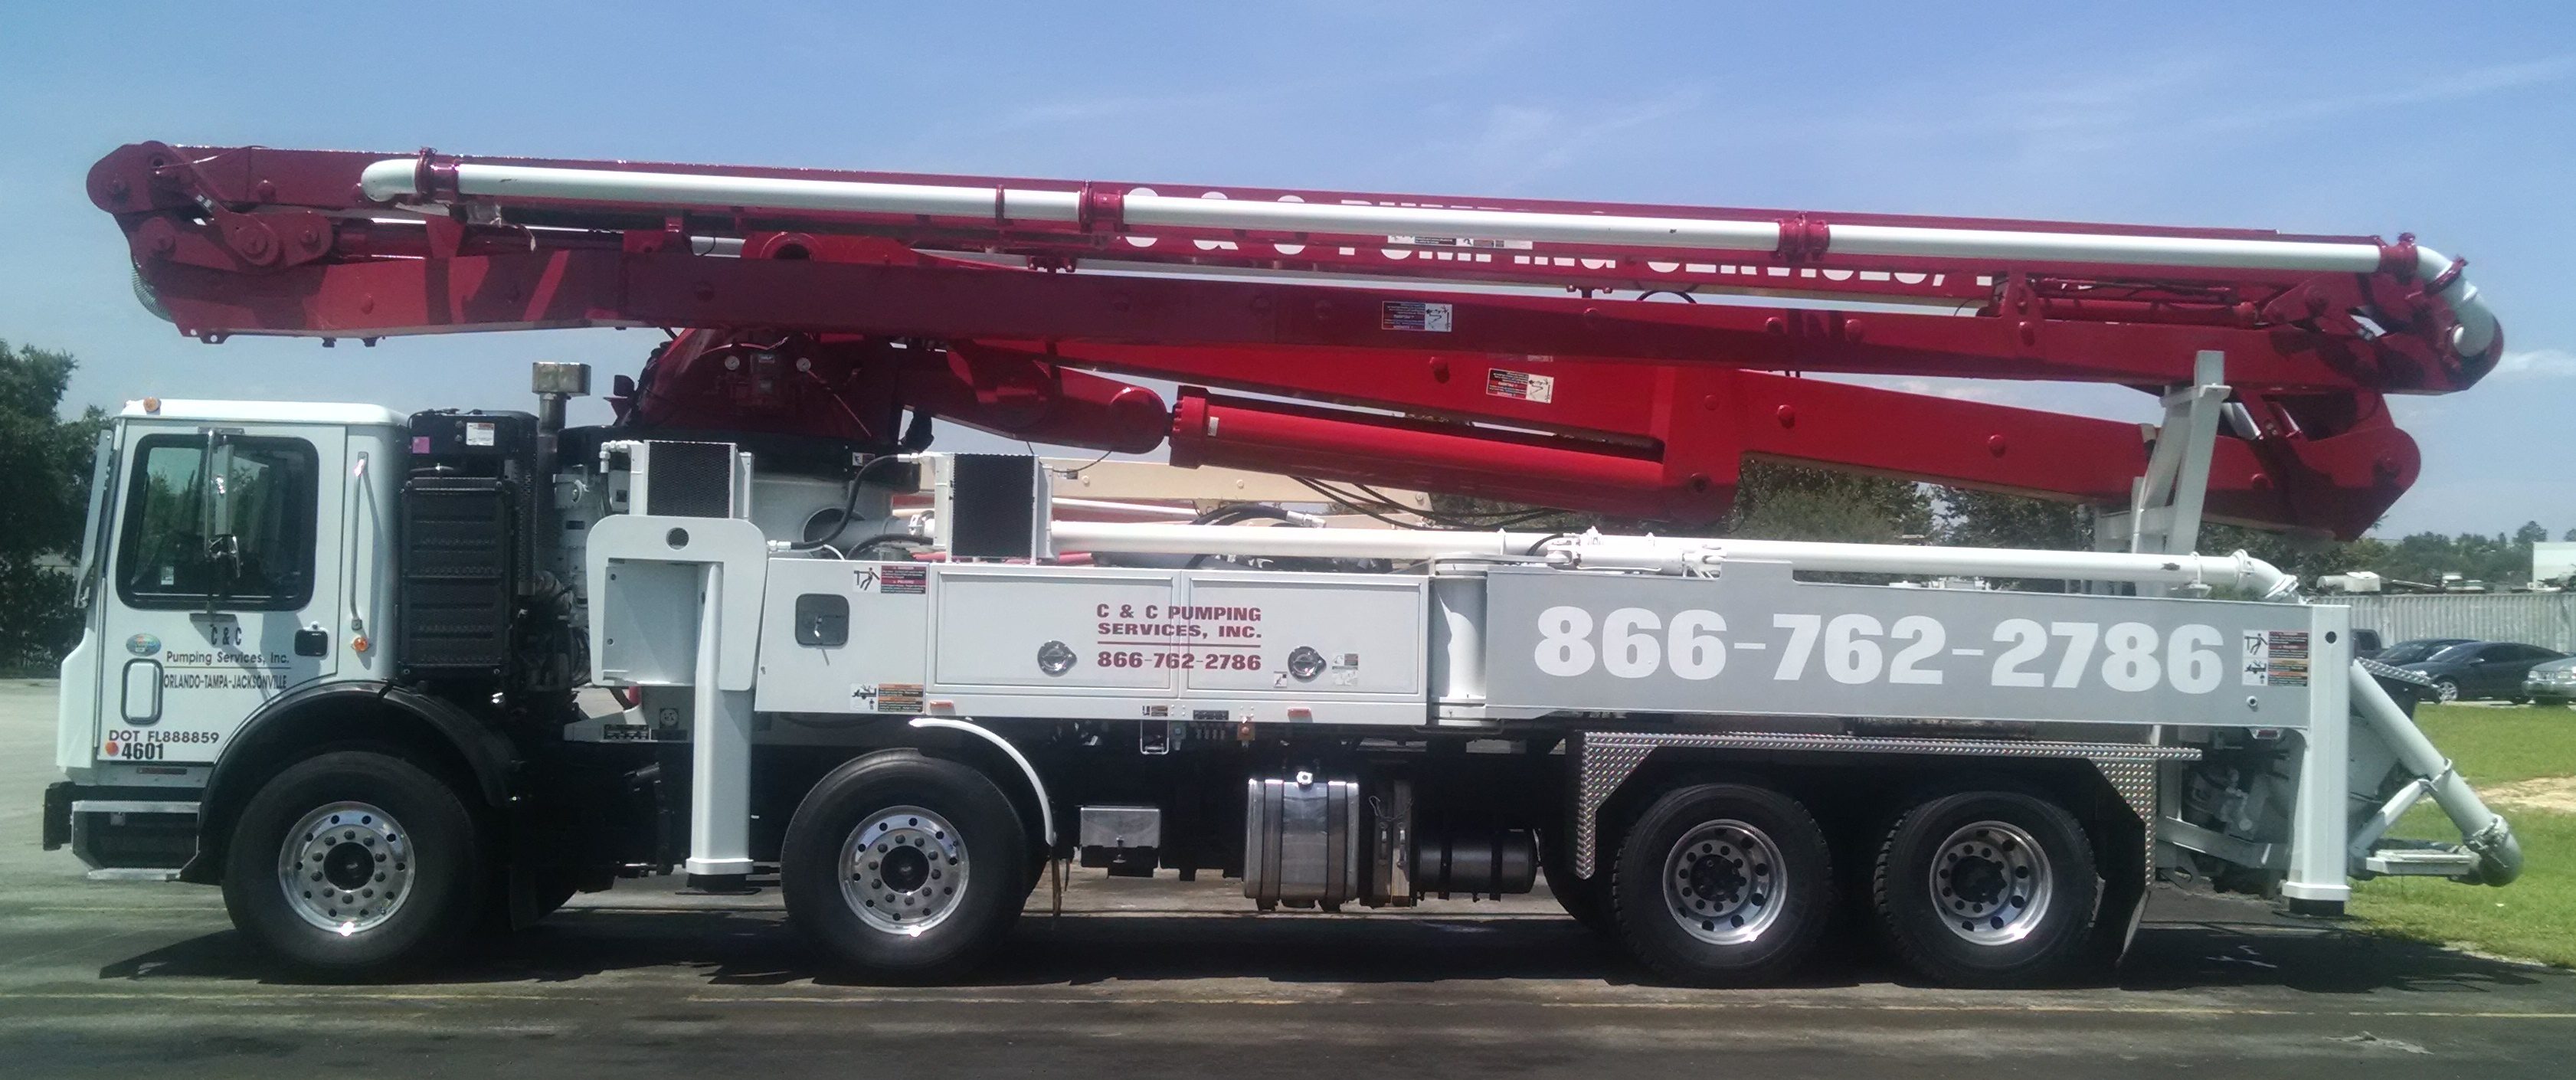 46 Meter concrete boom pump, provided by C&C Pumping Services Inc. 